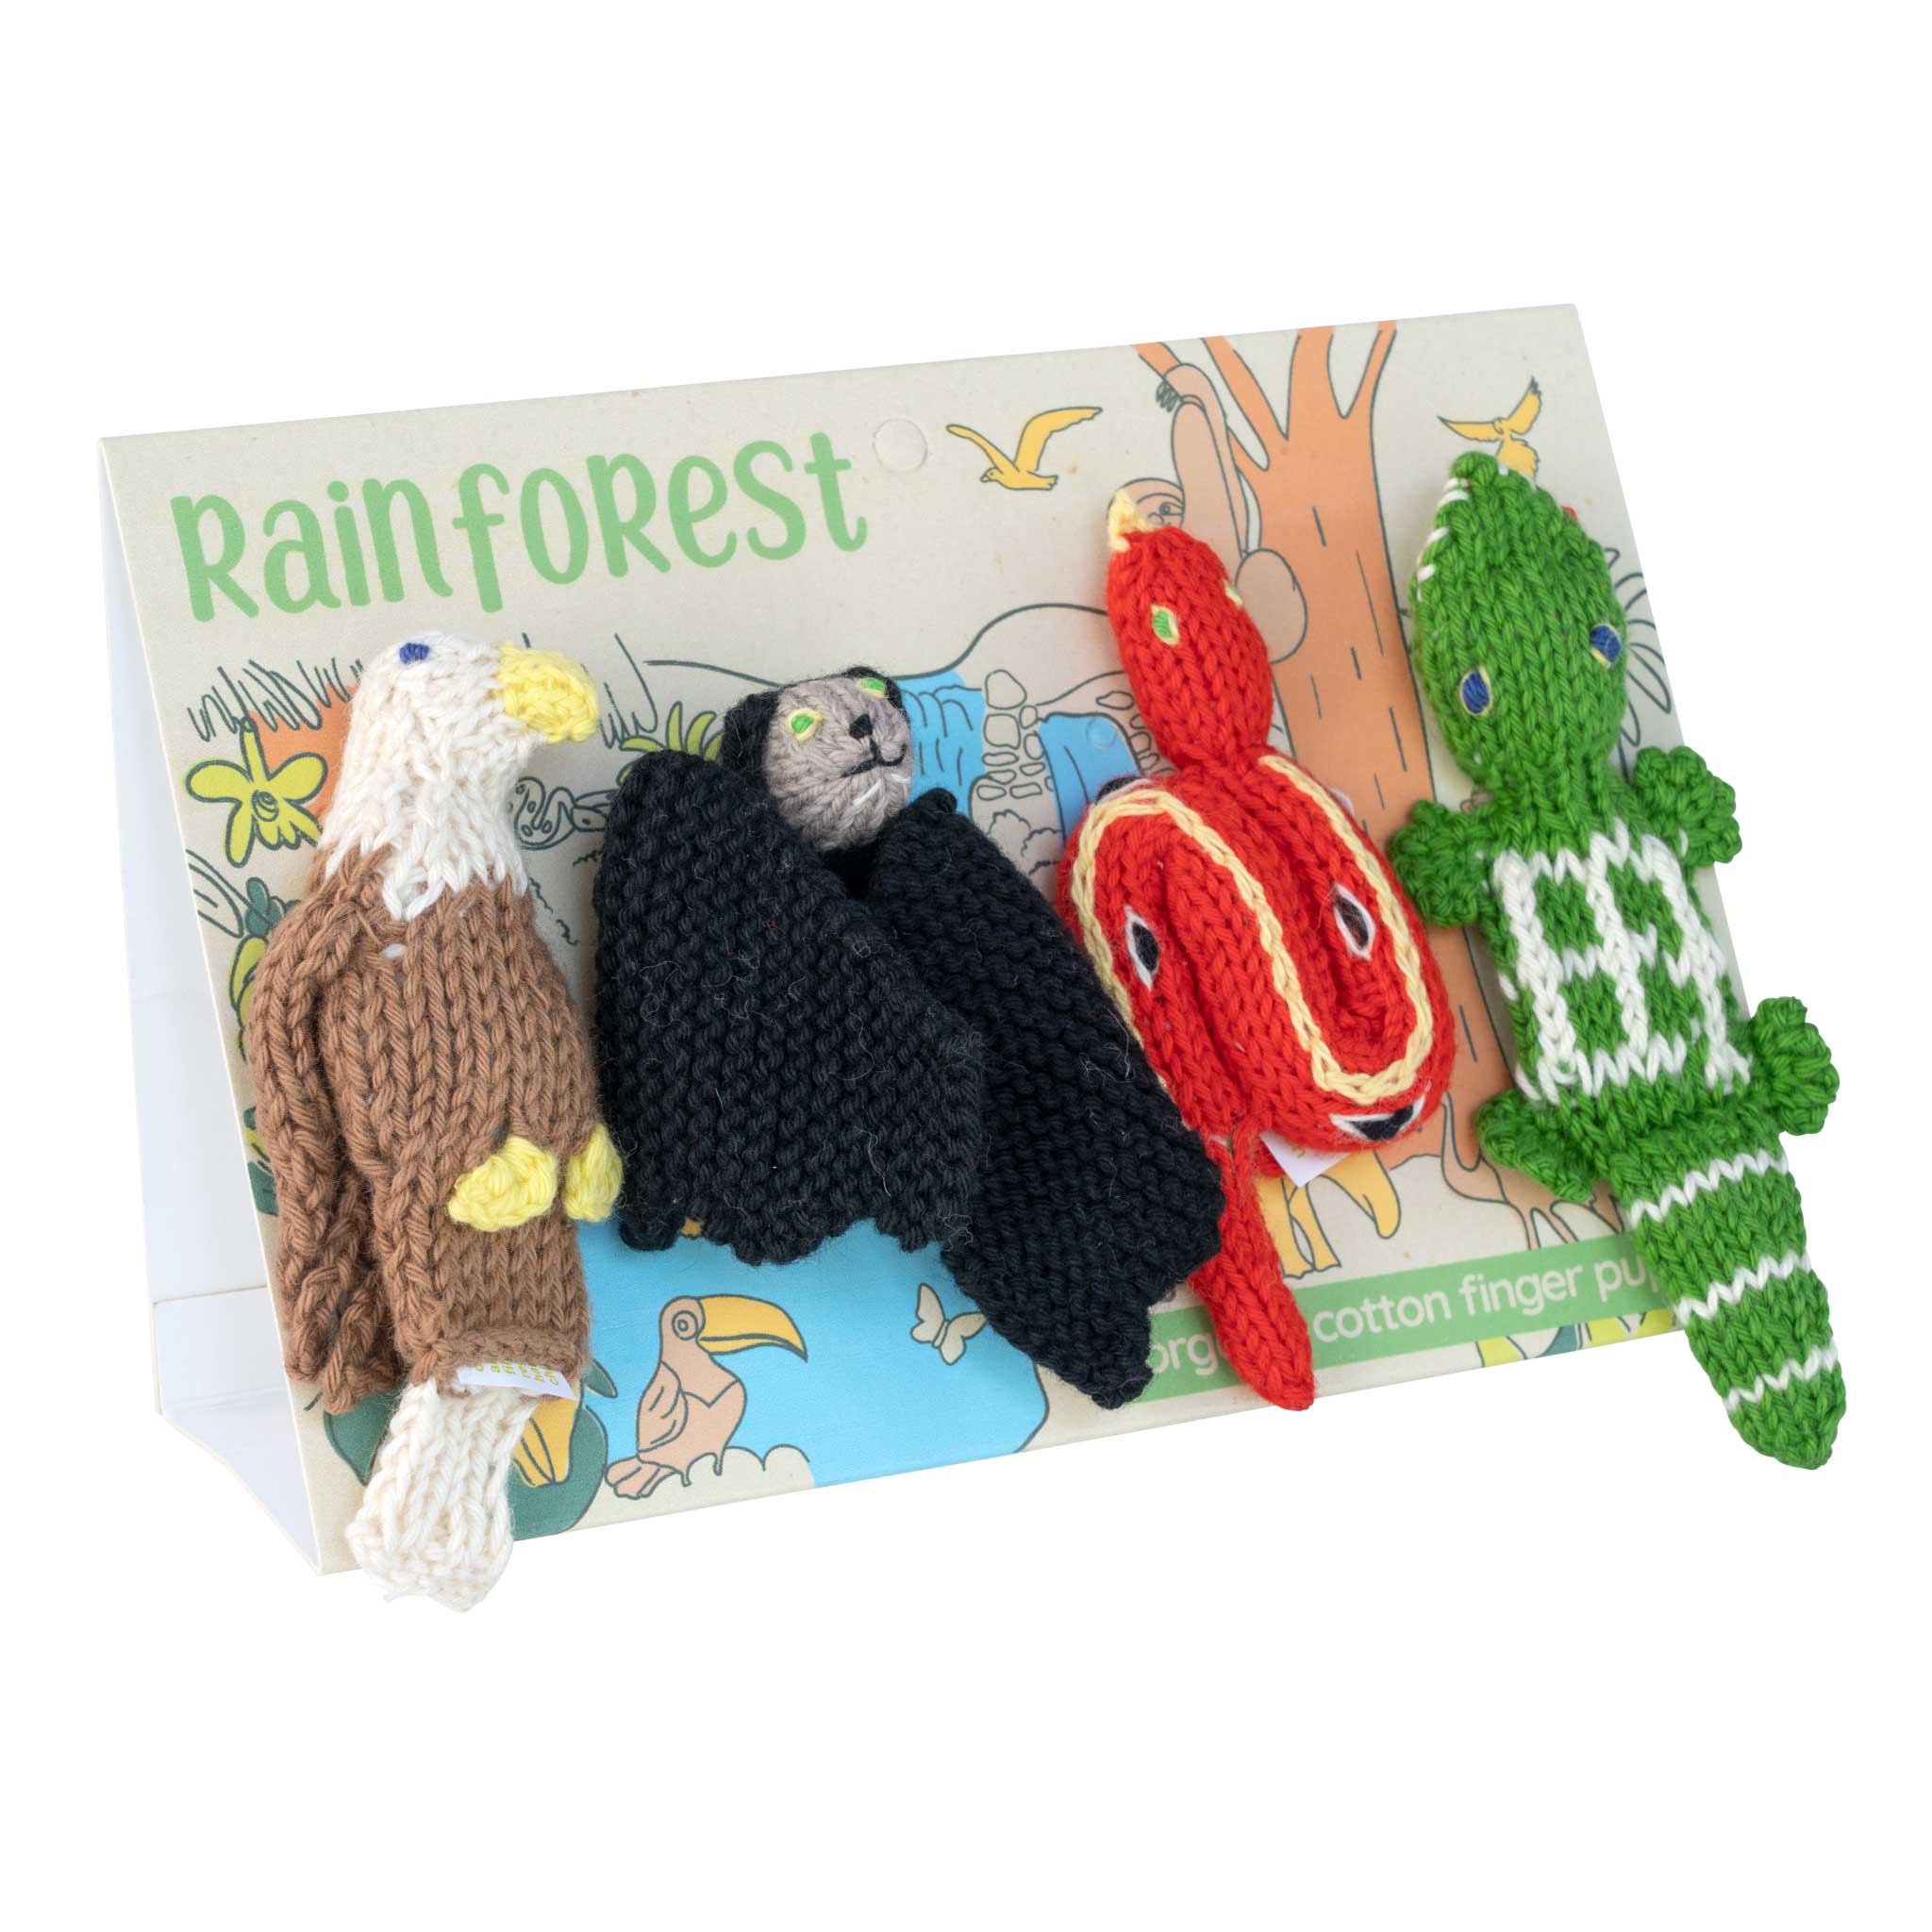 Rainforest Story Pack of 4 - Organic Cotton Finger Puppets